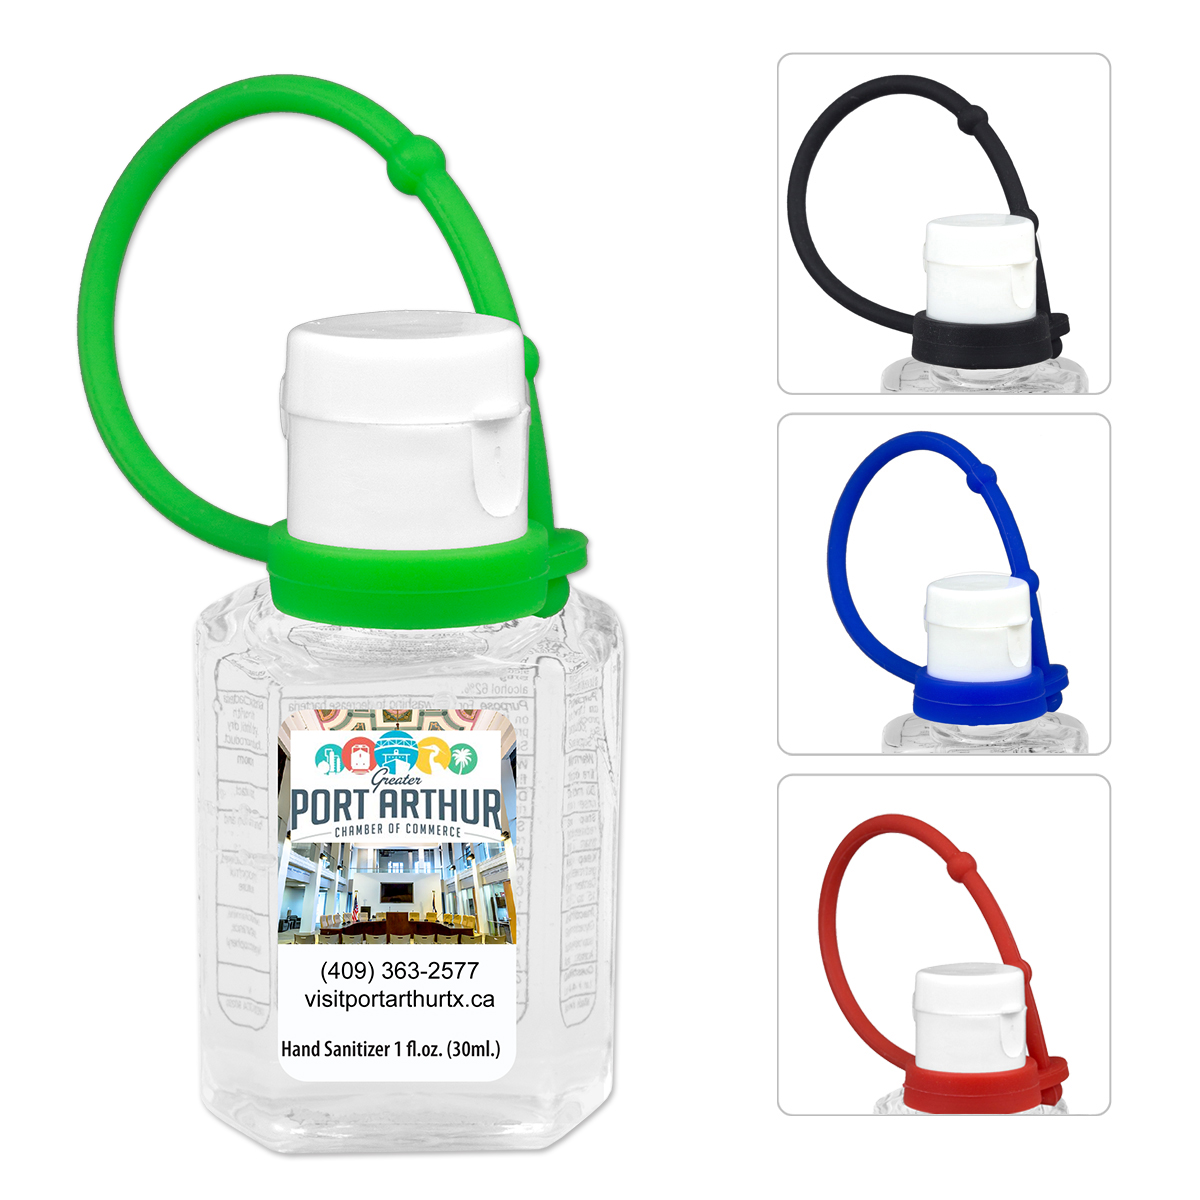 “SanPal Connect” 1.0 oz Compact Hand Sanitizer Antibacterial Gel in Flip-Top Squeeze Bottle with Colorful Silicone Leash